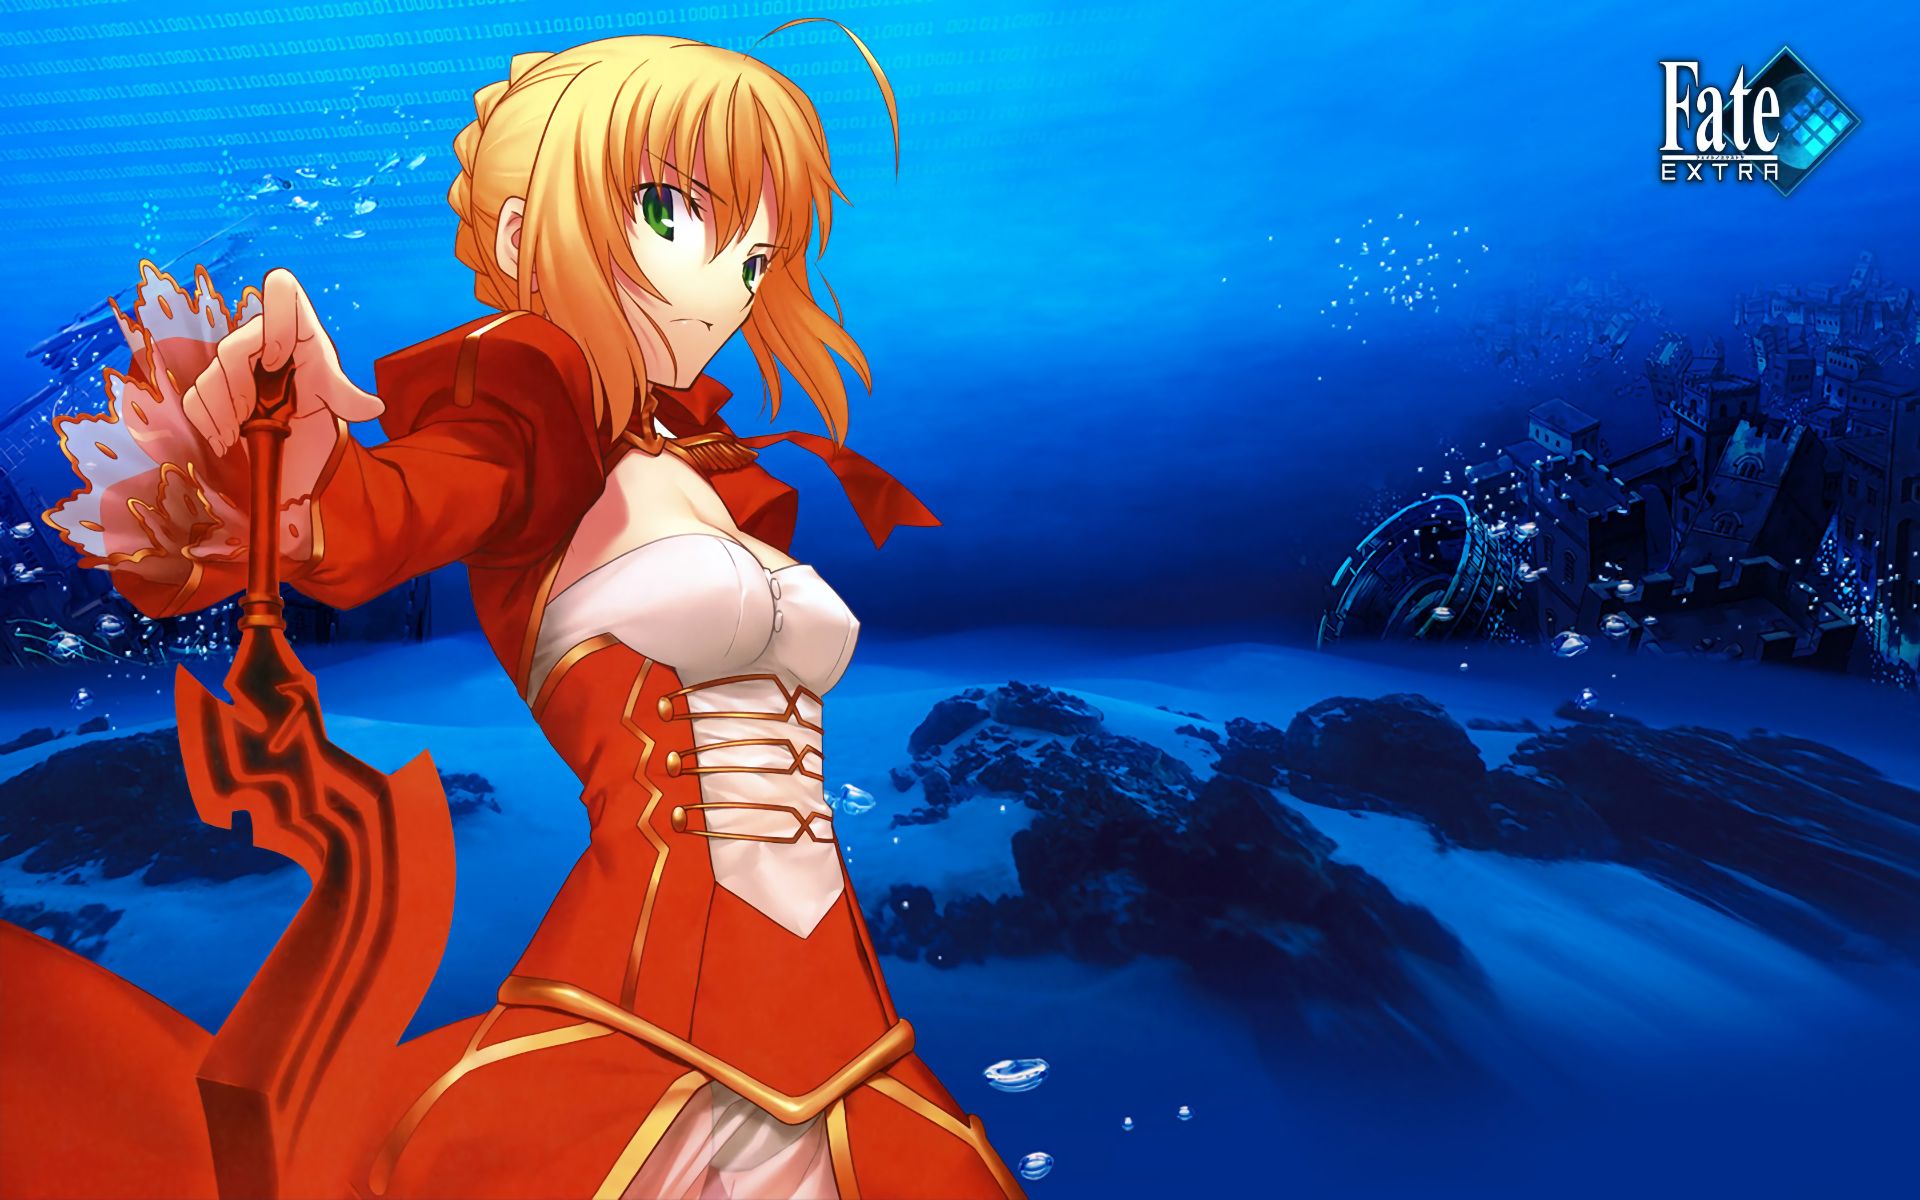  Fate/extra HD Android Wallpapers